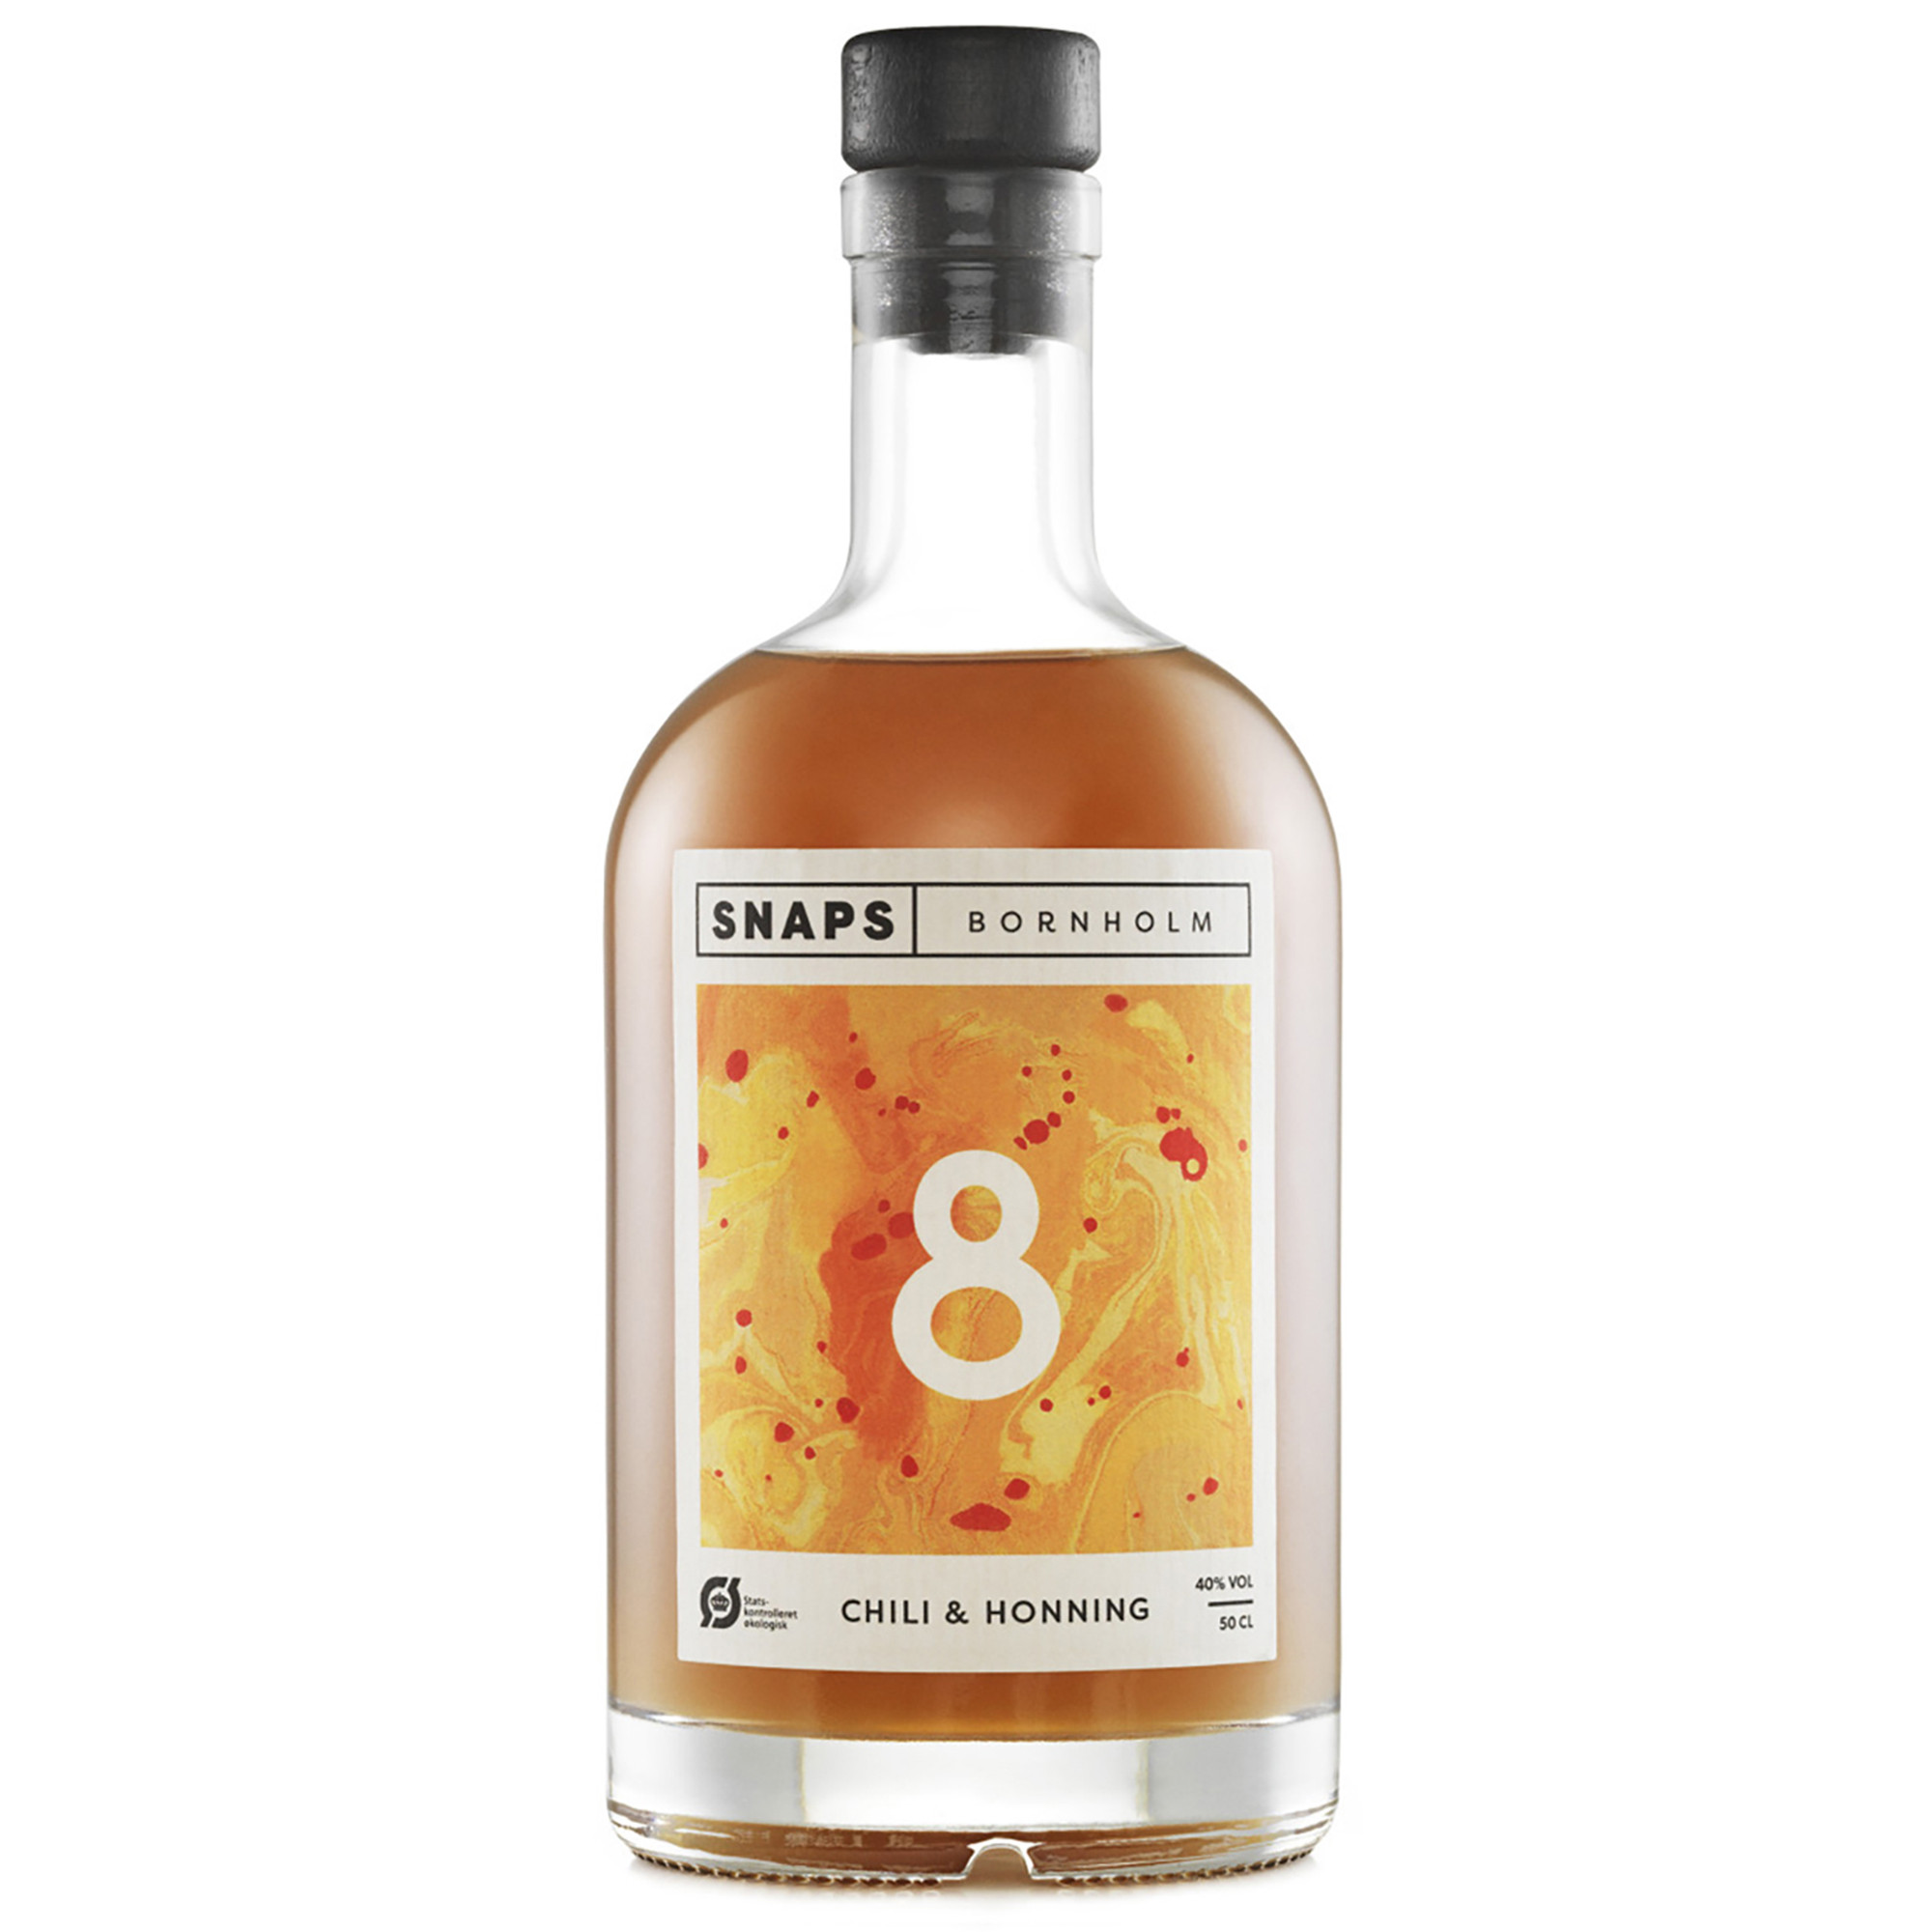 No. 8 Chili & Honning Snaps - 50 cl